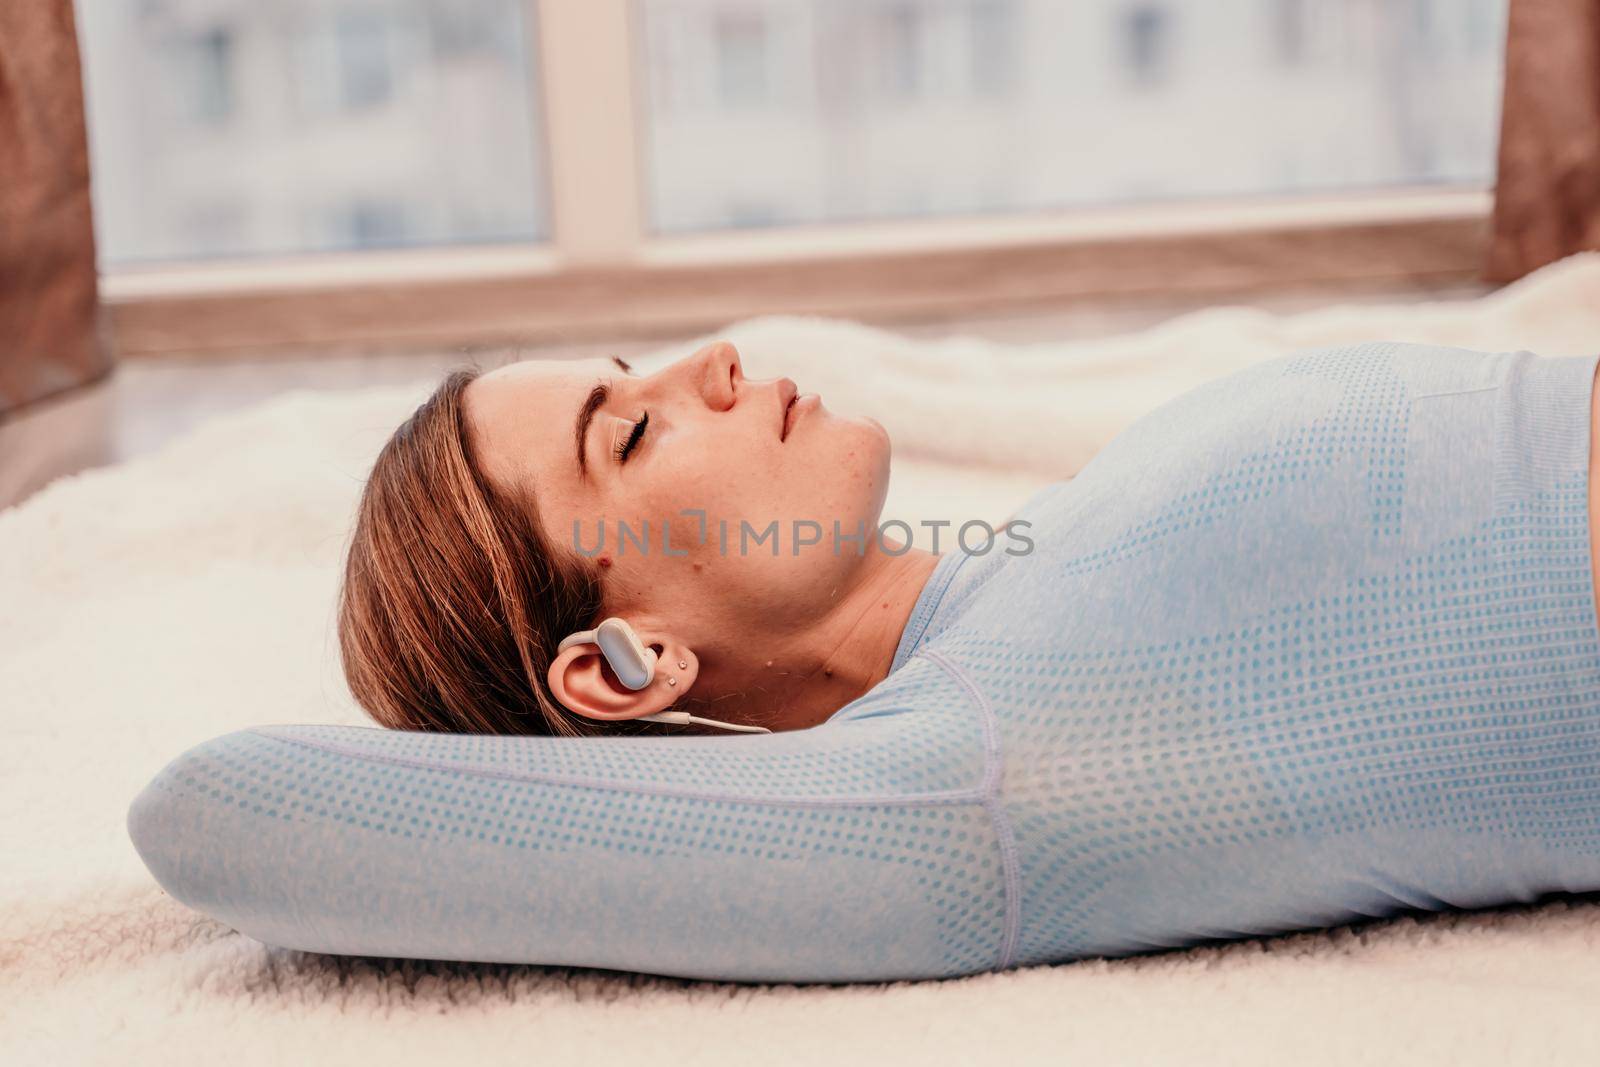 Side view portrait of relaxed woman listening to music with headphones lying on carpet at home. She is dressed in a blue tracksuit